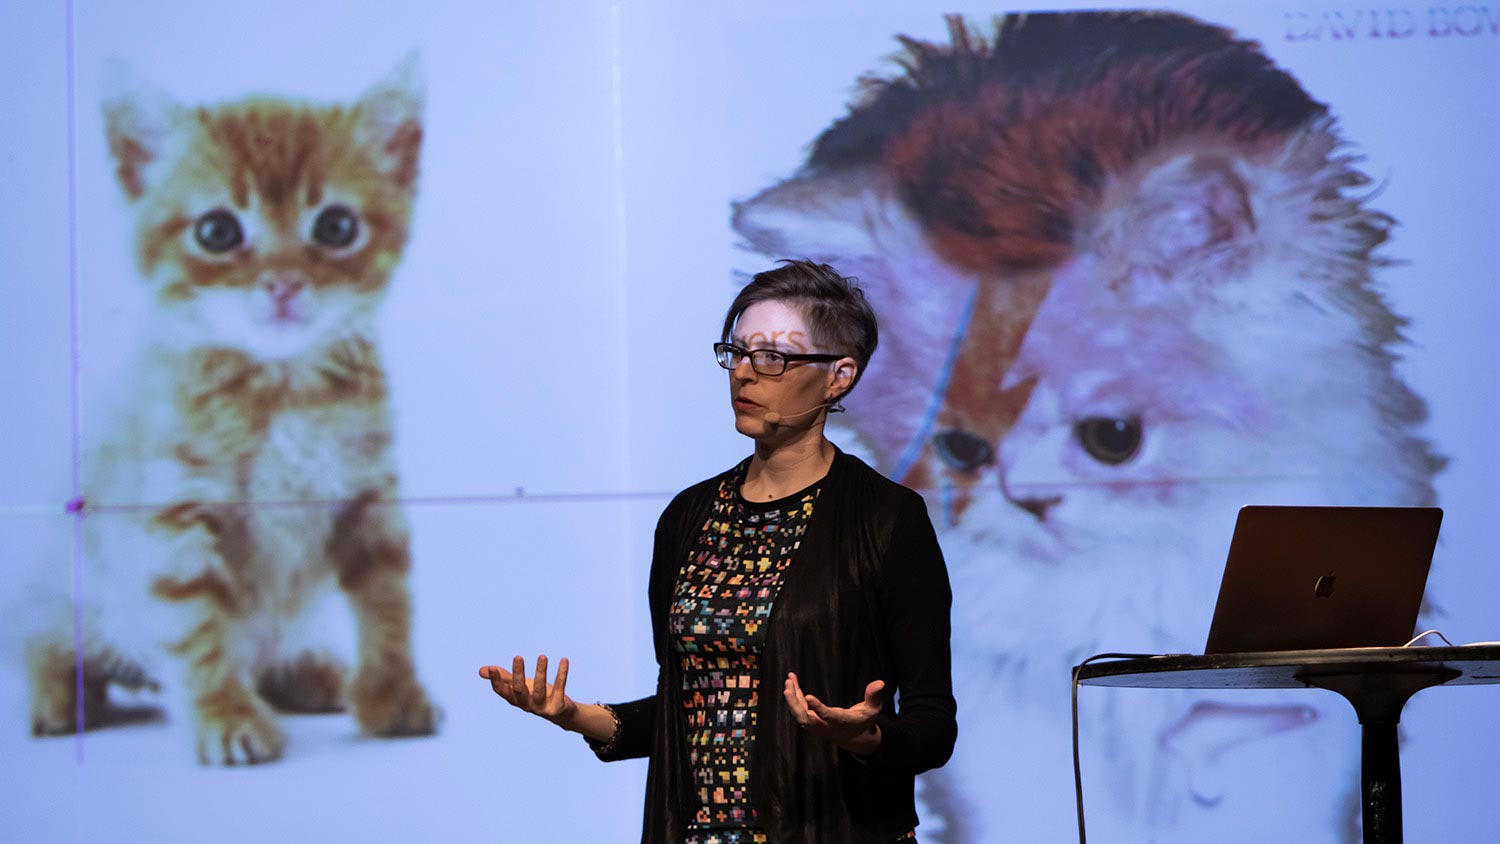 Closeup of Rebecca Fiebrink during her keynote presentation at the International Conference on Live Interfaces (March 10, 2020). Photo by Shreejay Shrestha.